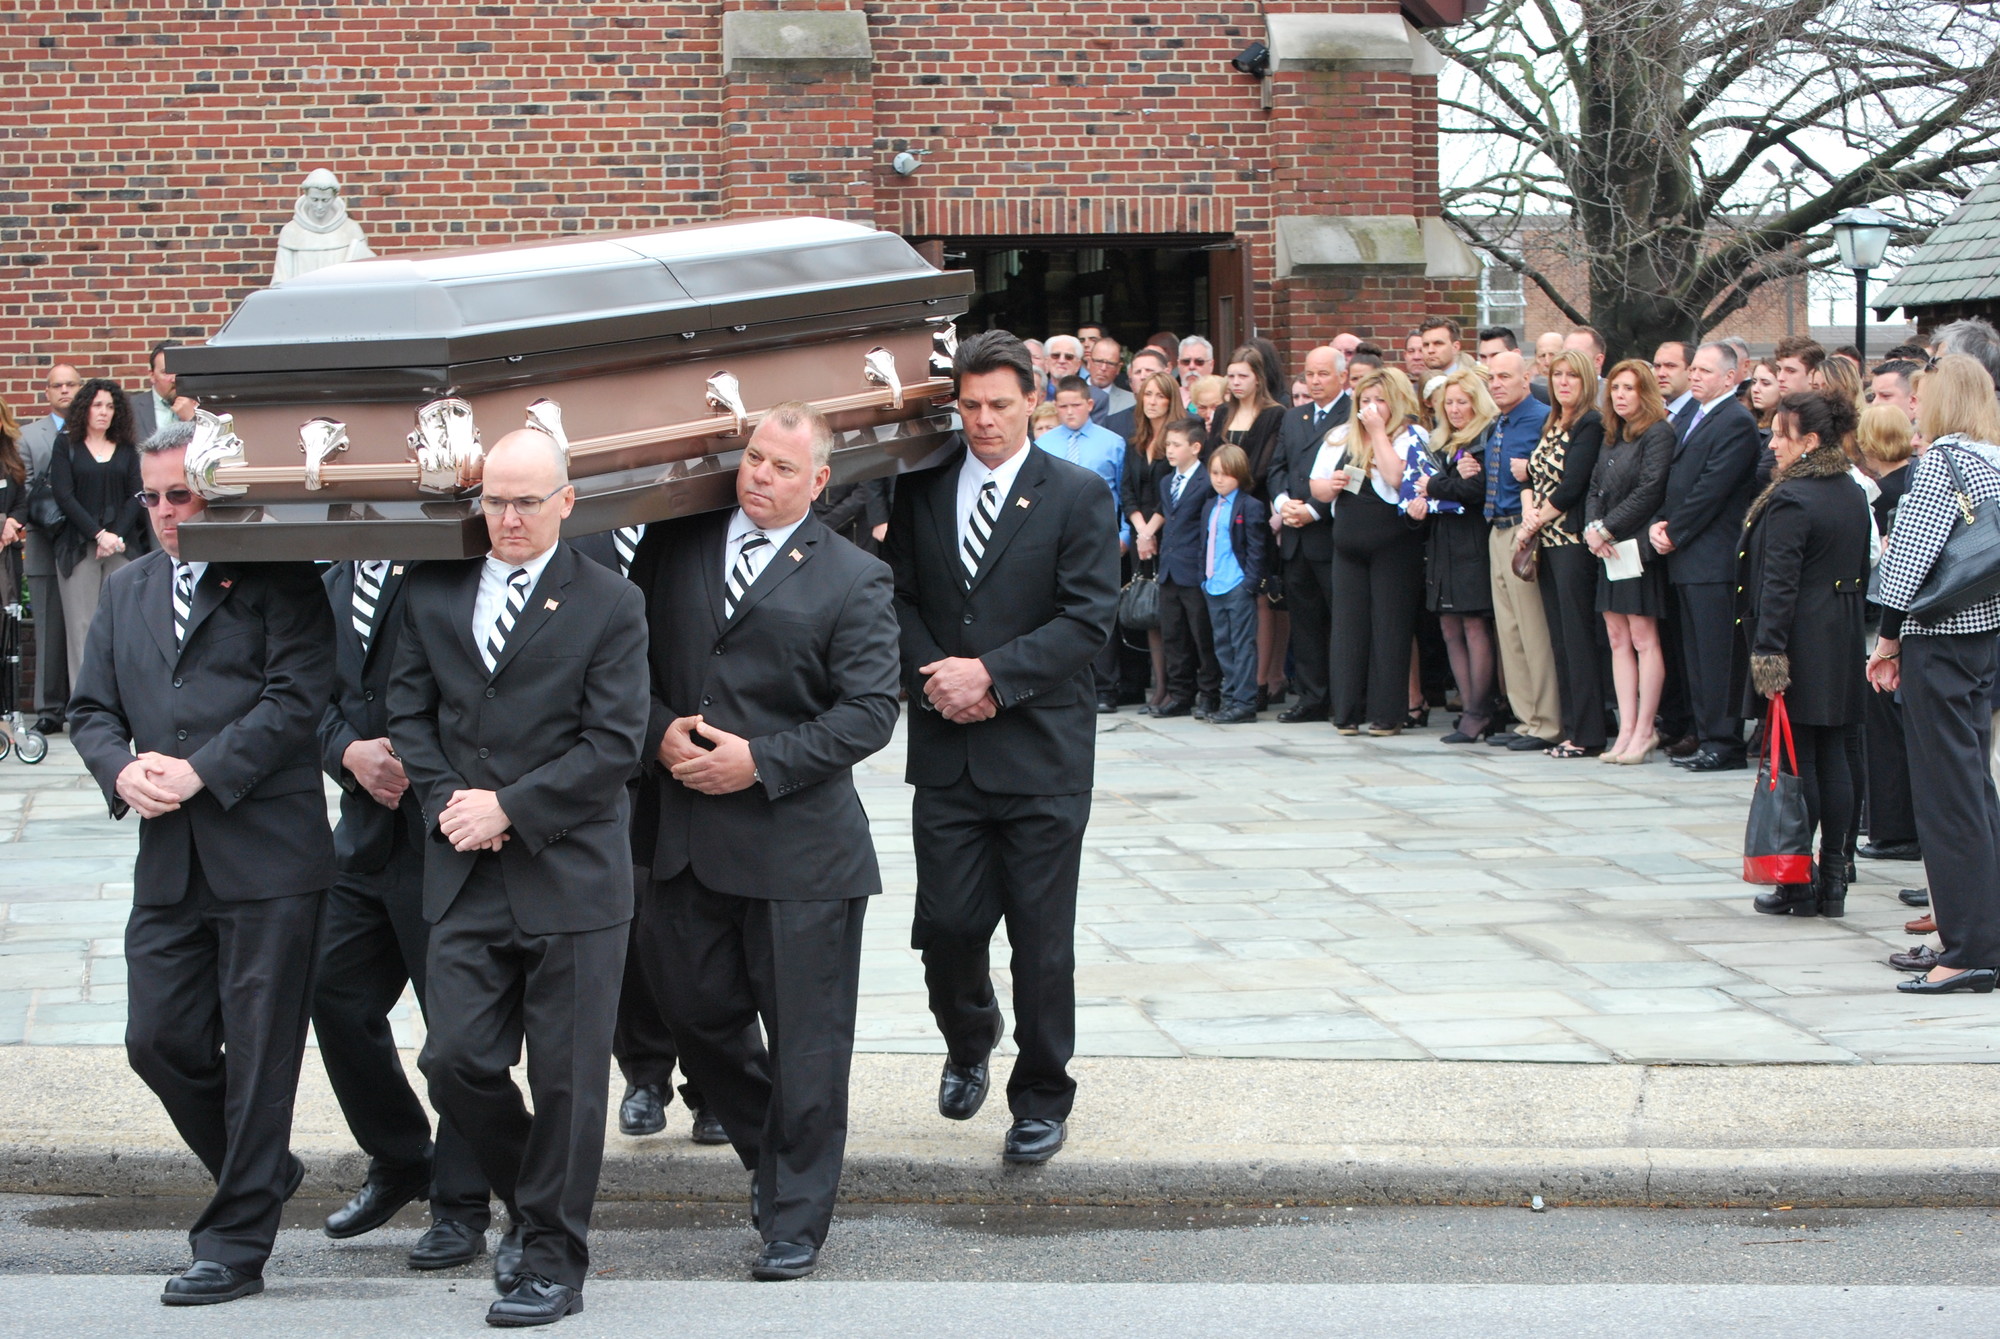 Pallbearers Carried Dan Farrell while family and friends look on.